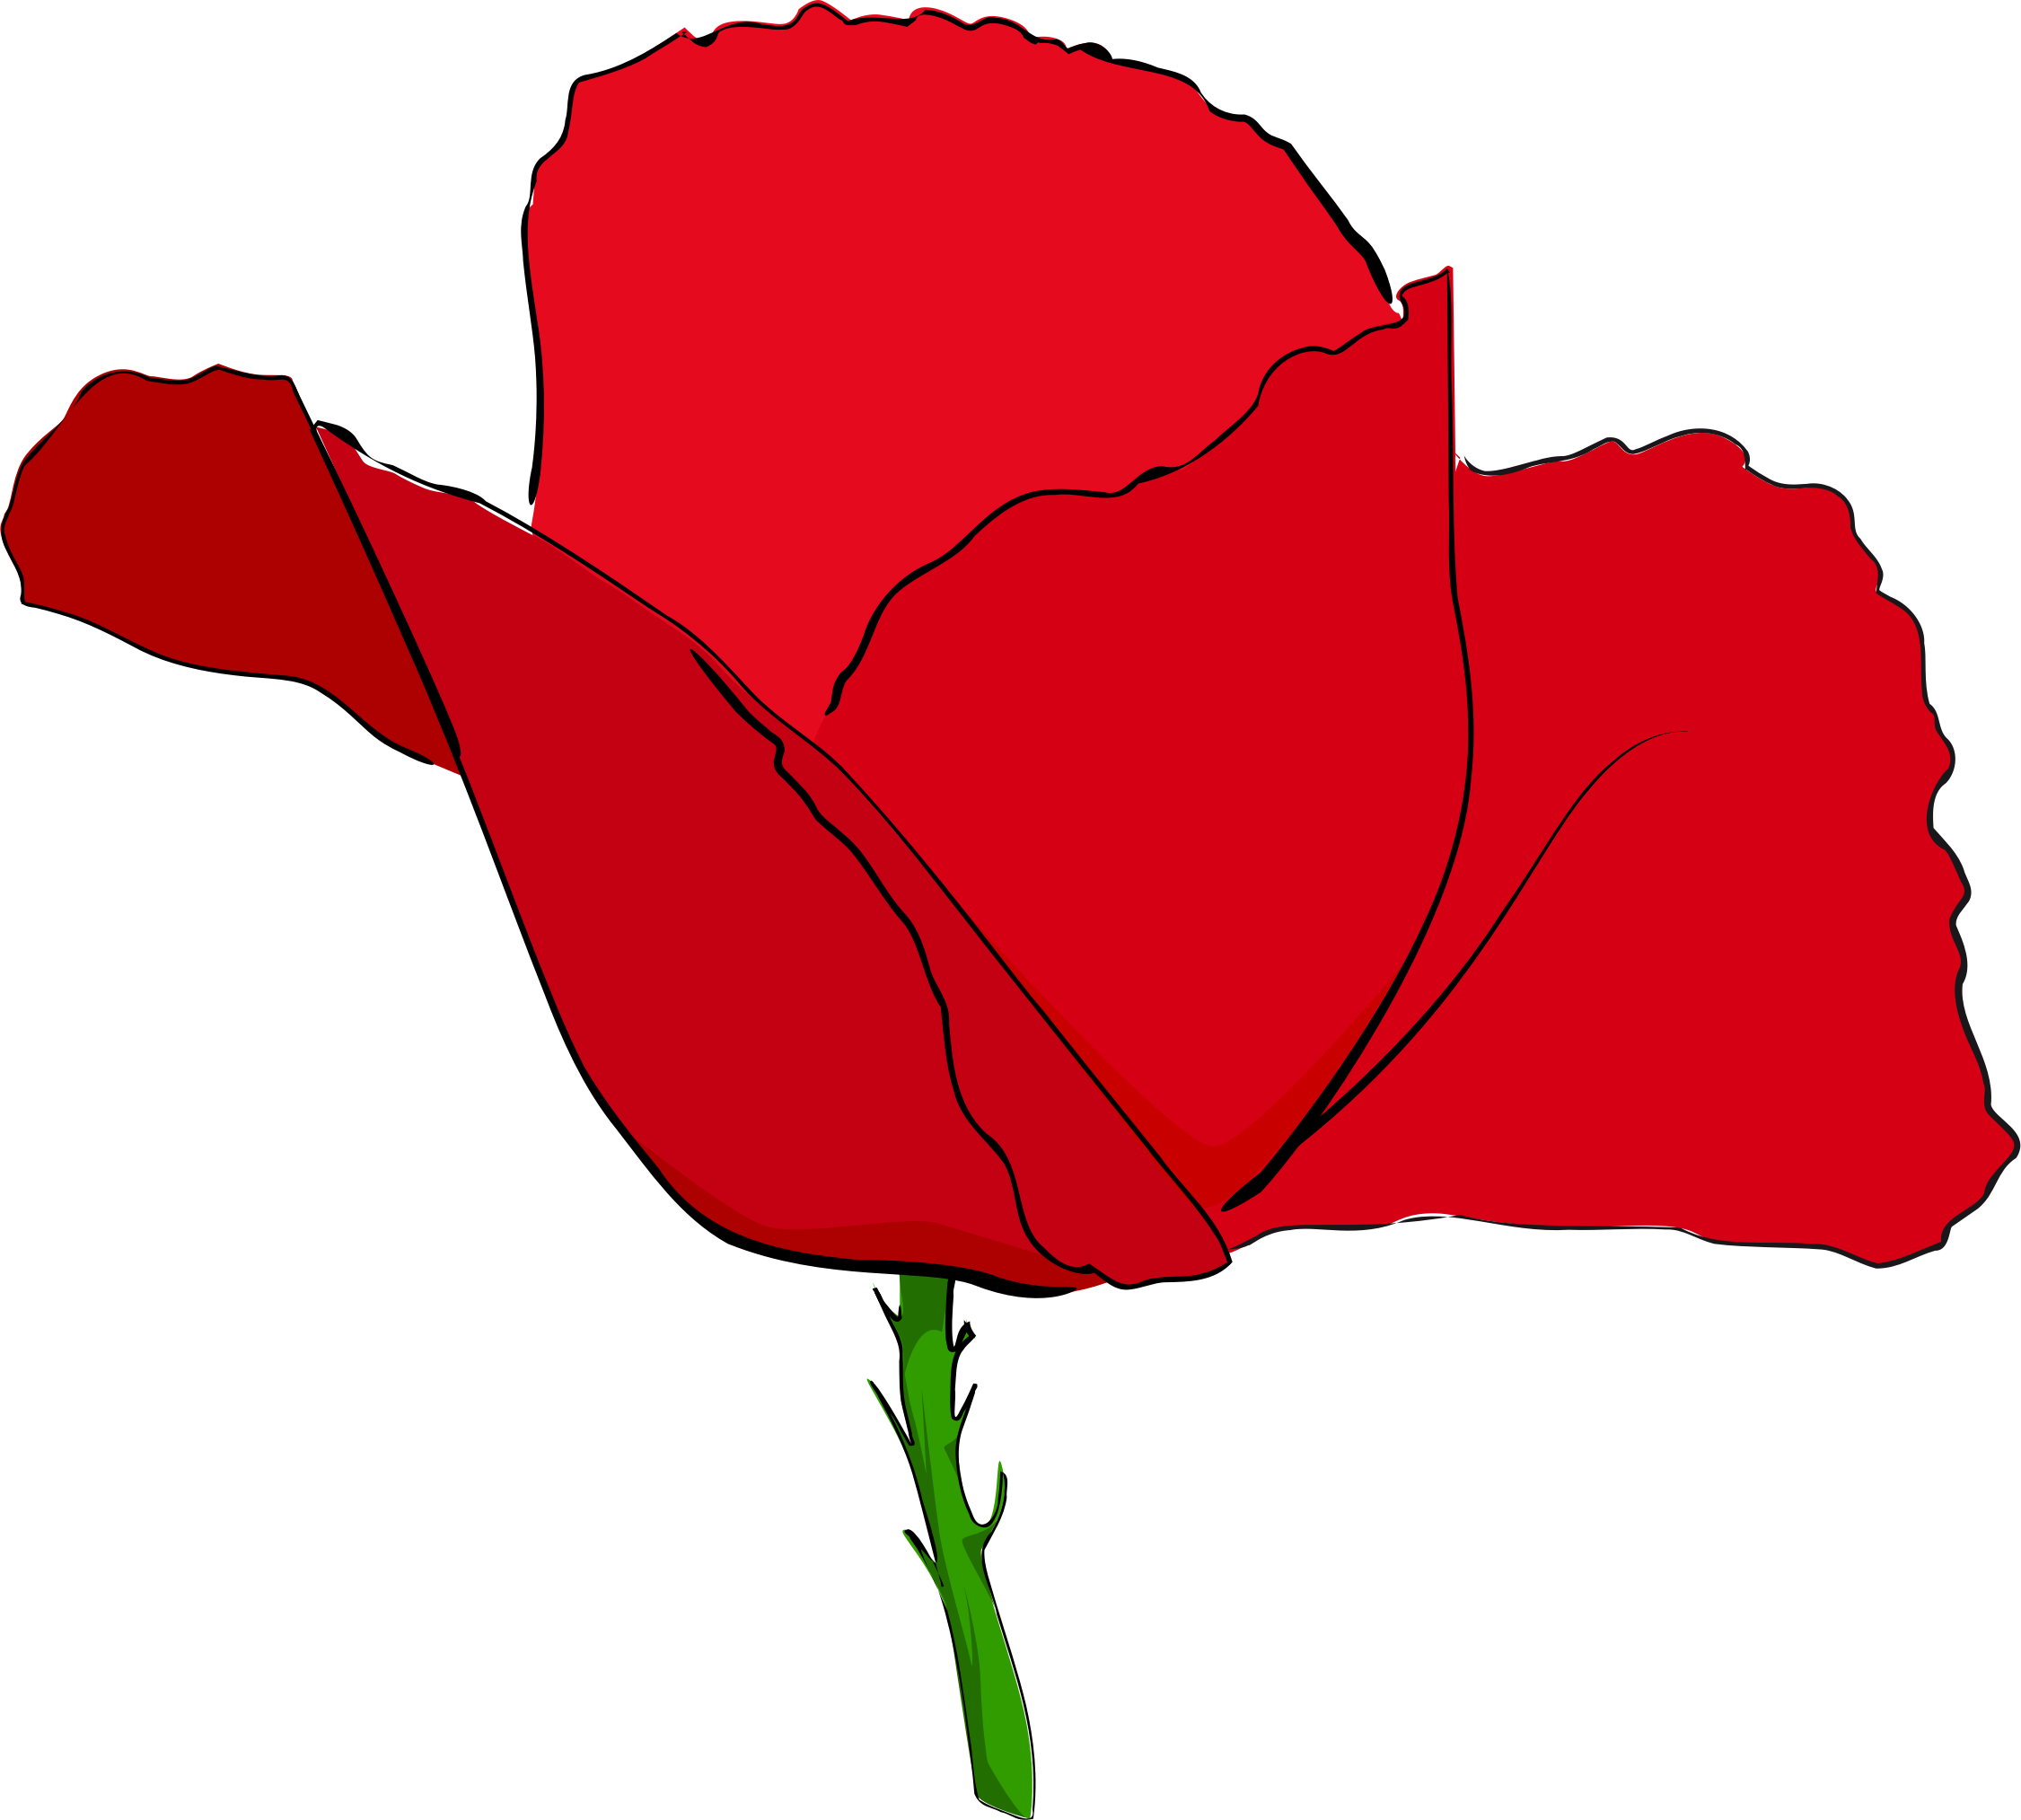 Download - Red Image Of Poppy Flower (2251x2027)